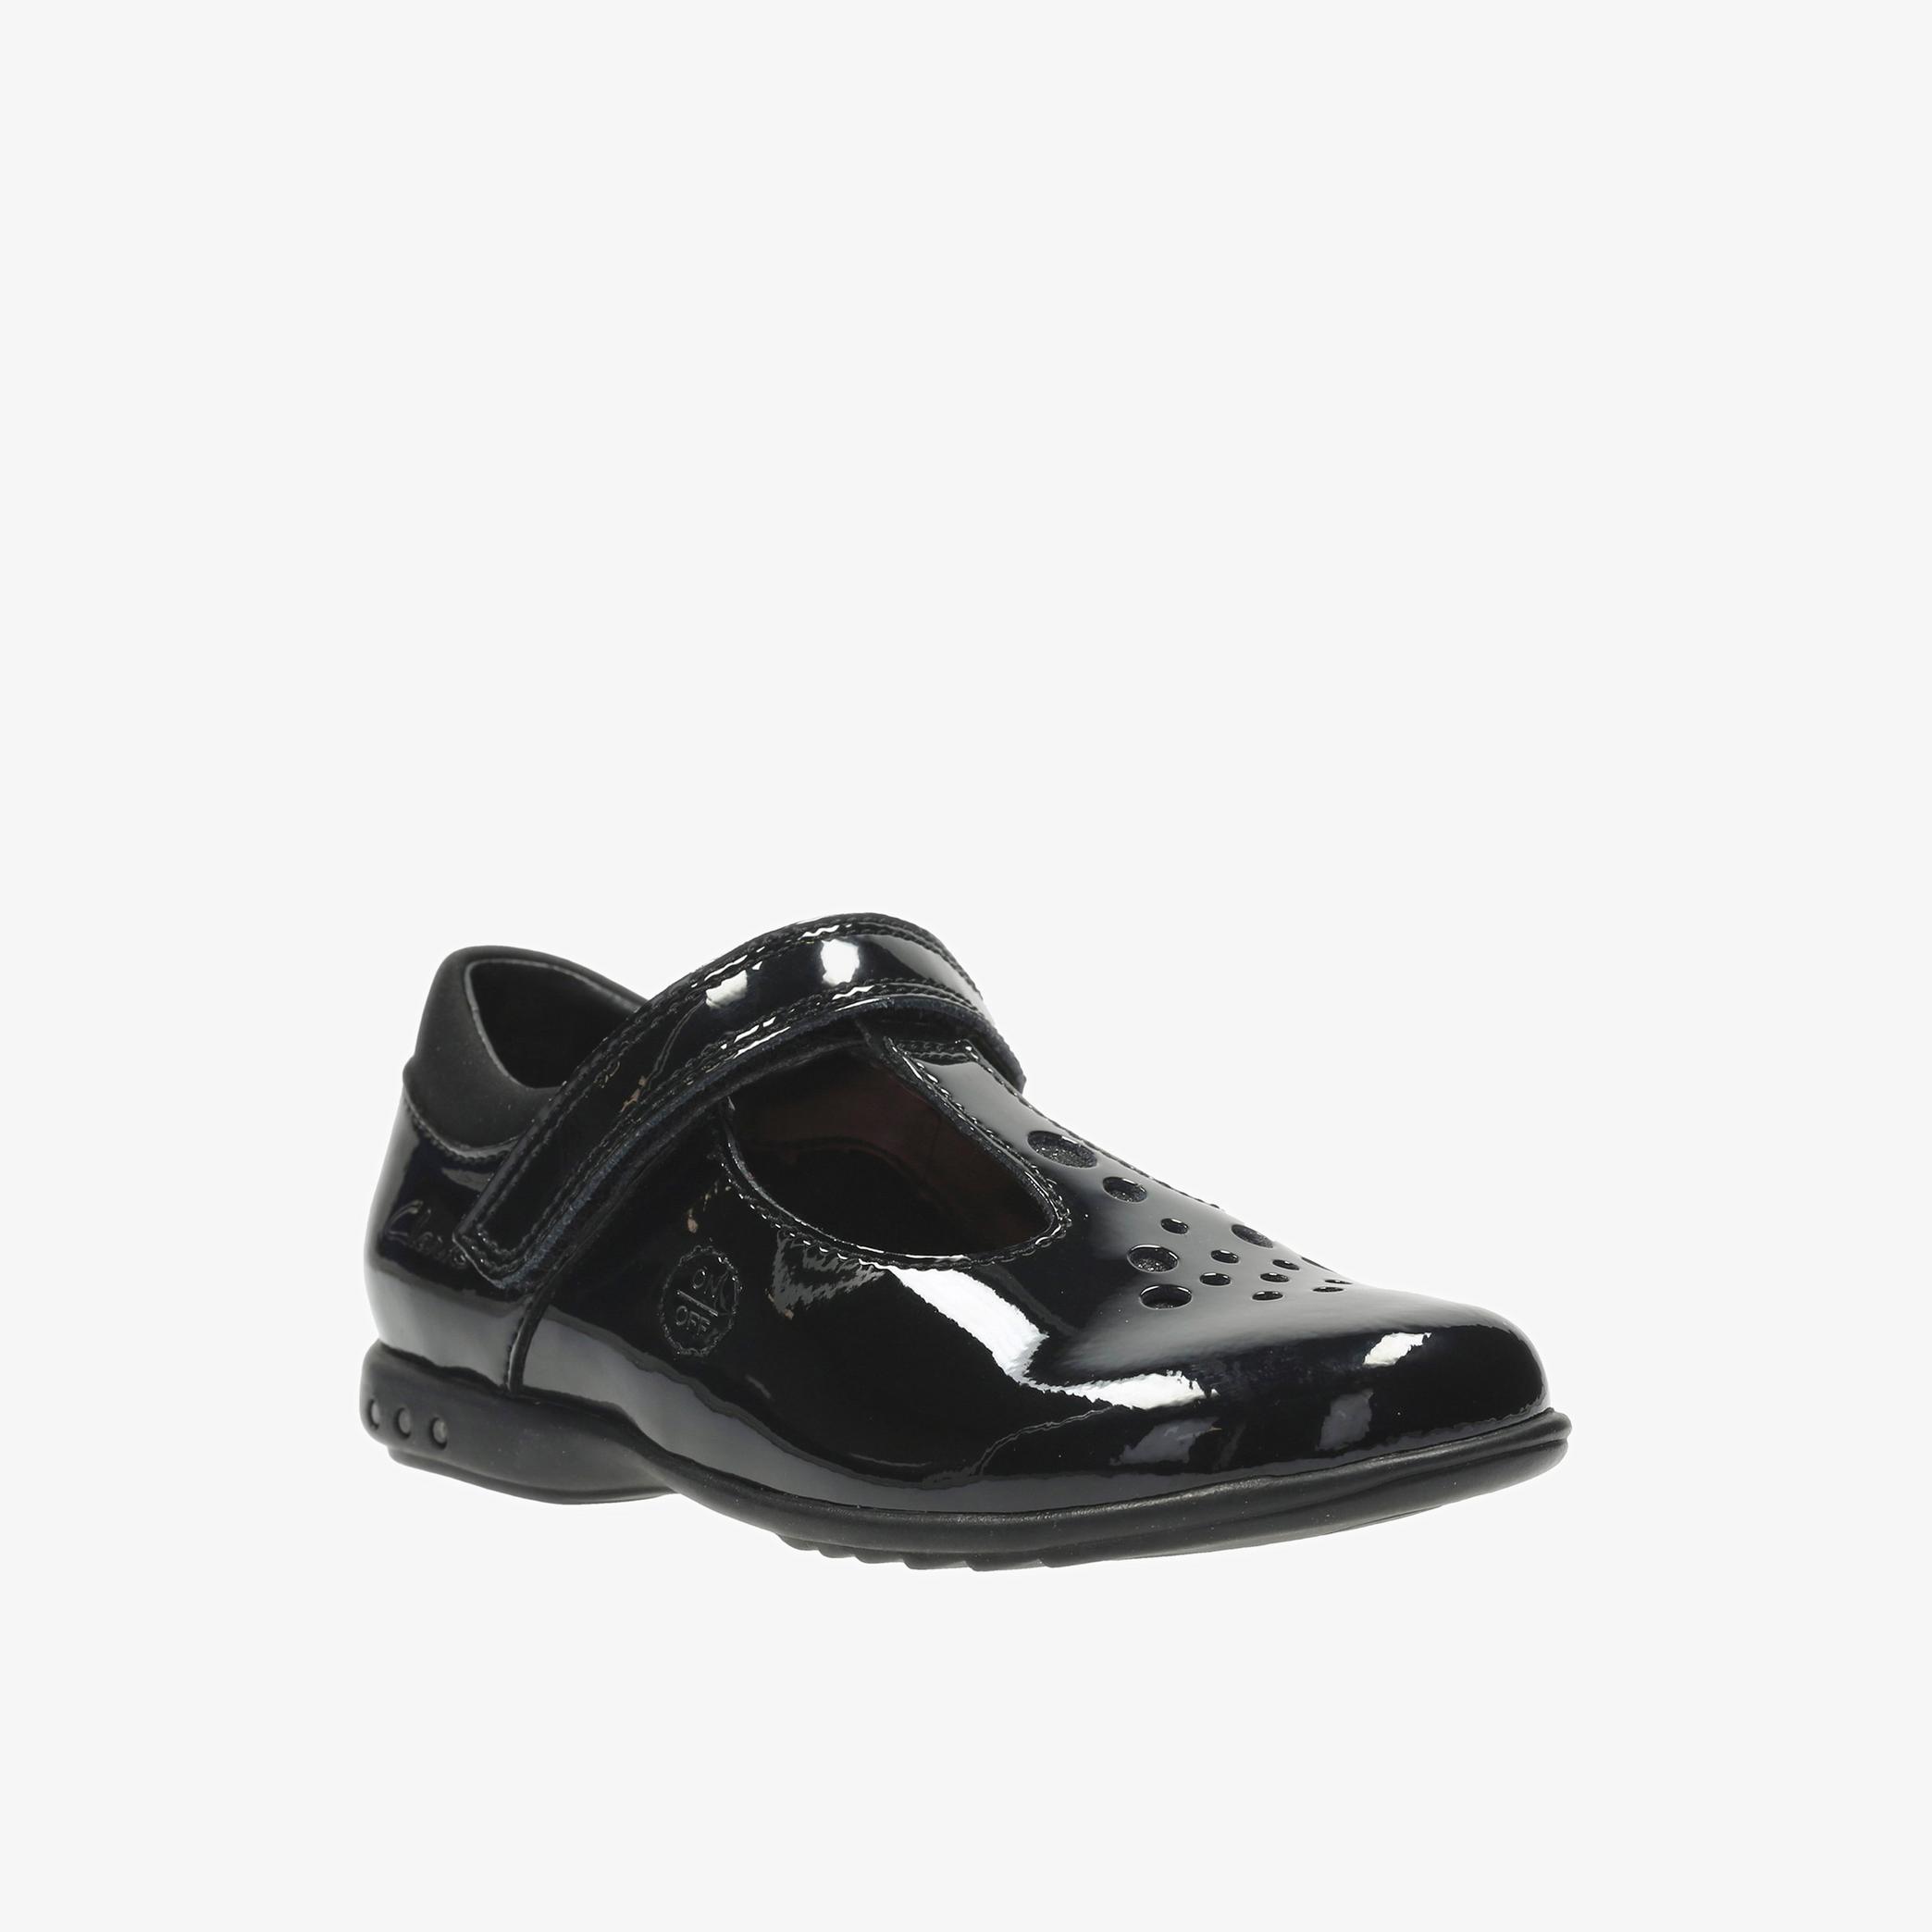 Trixi Pip Toddler Black Patent Shoes, view 3 of 6